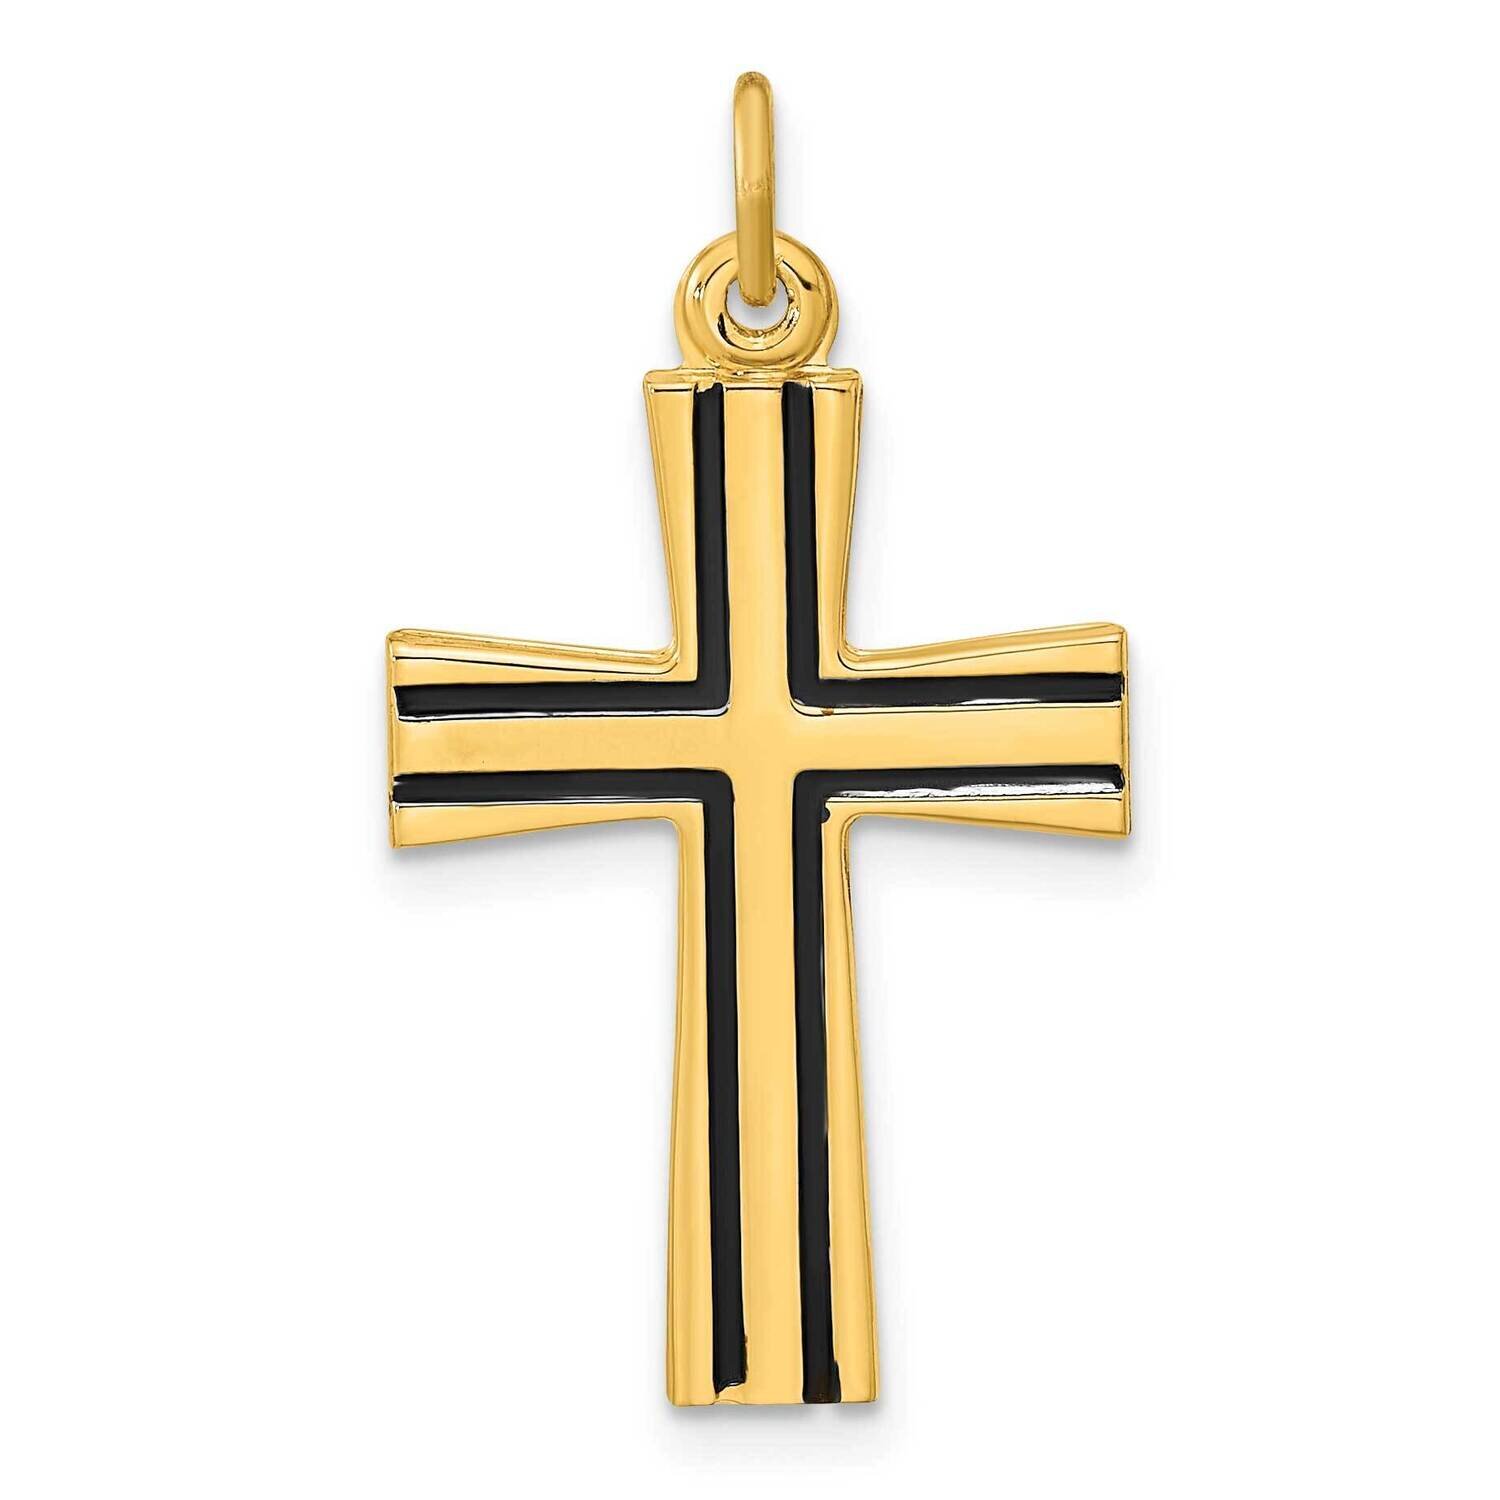 Polished Enameled Cross Pendant Sterling Silver Gold-Plated QC11118